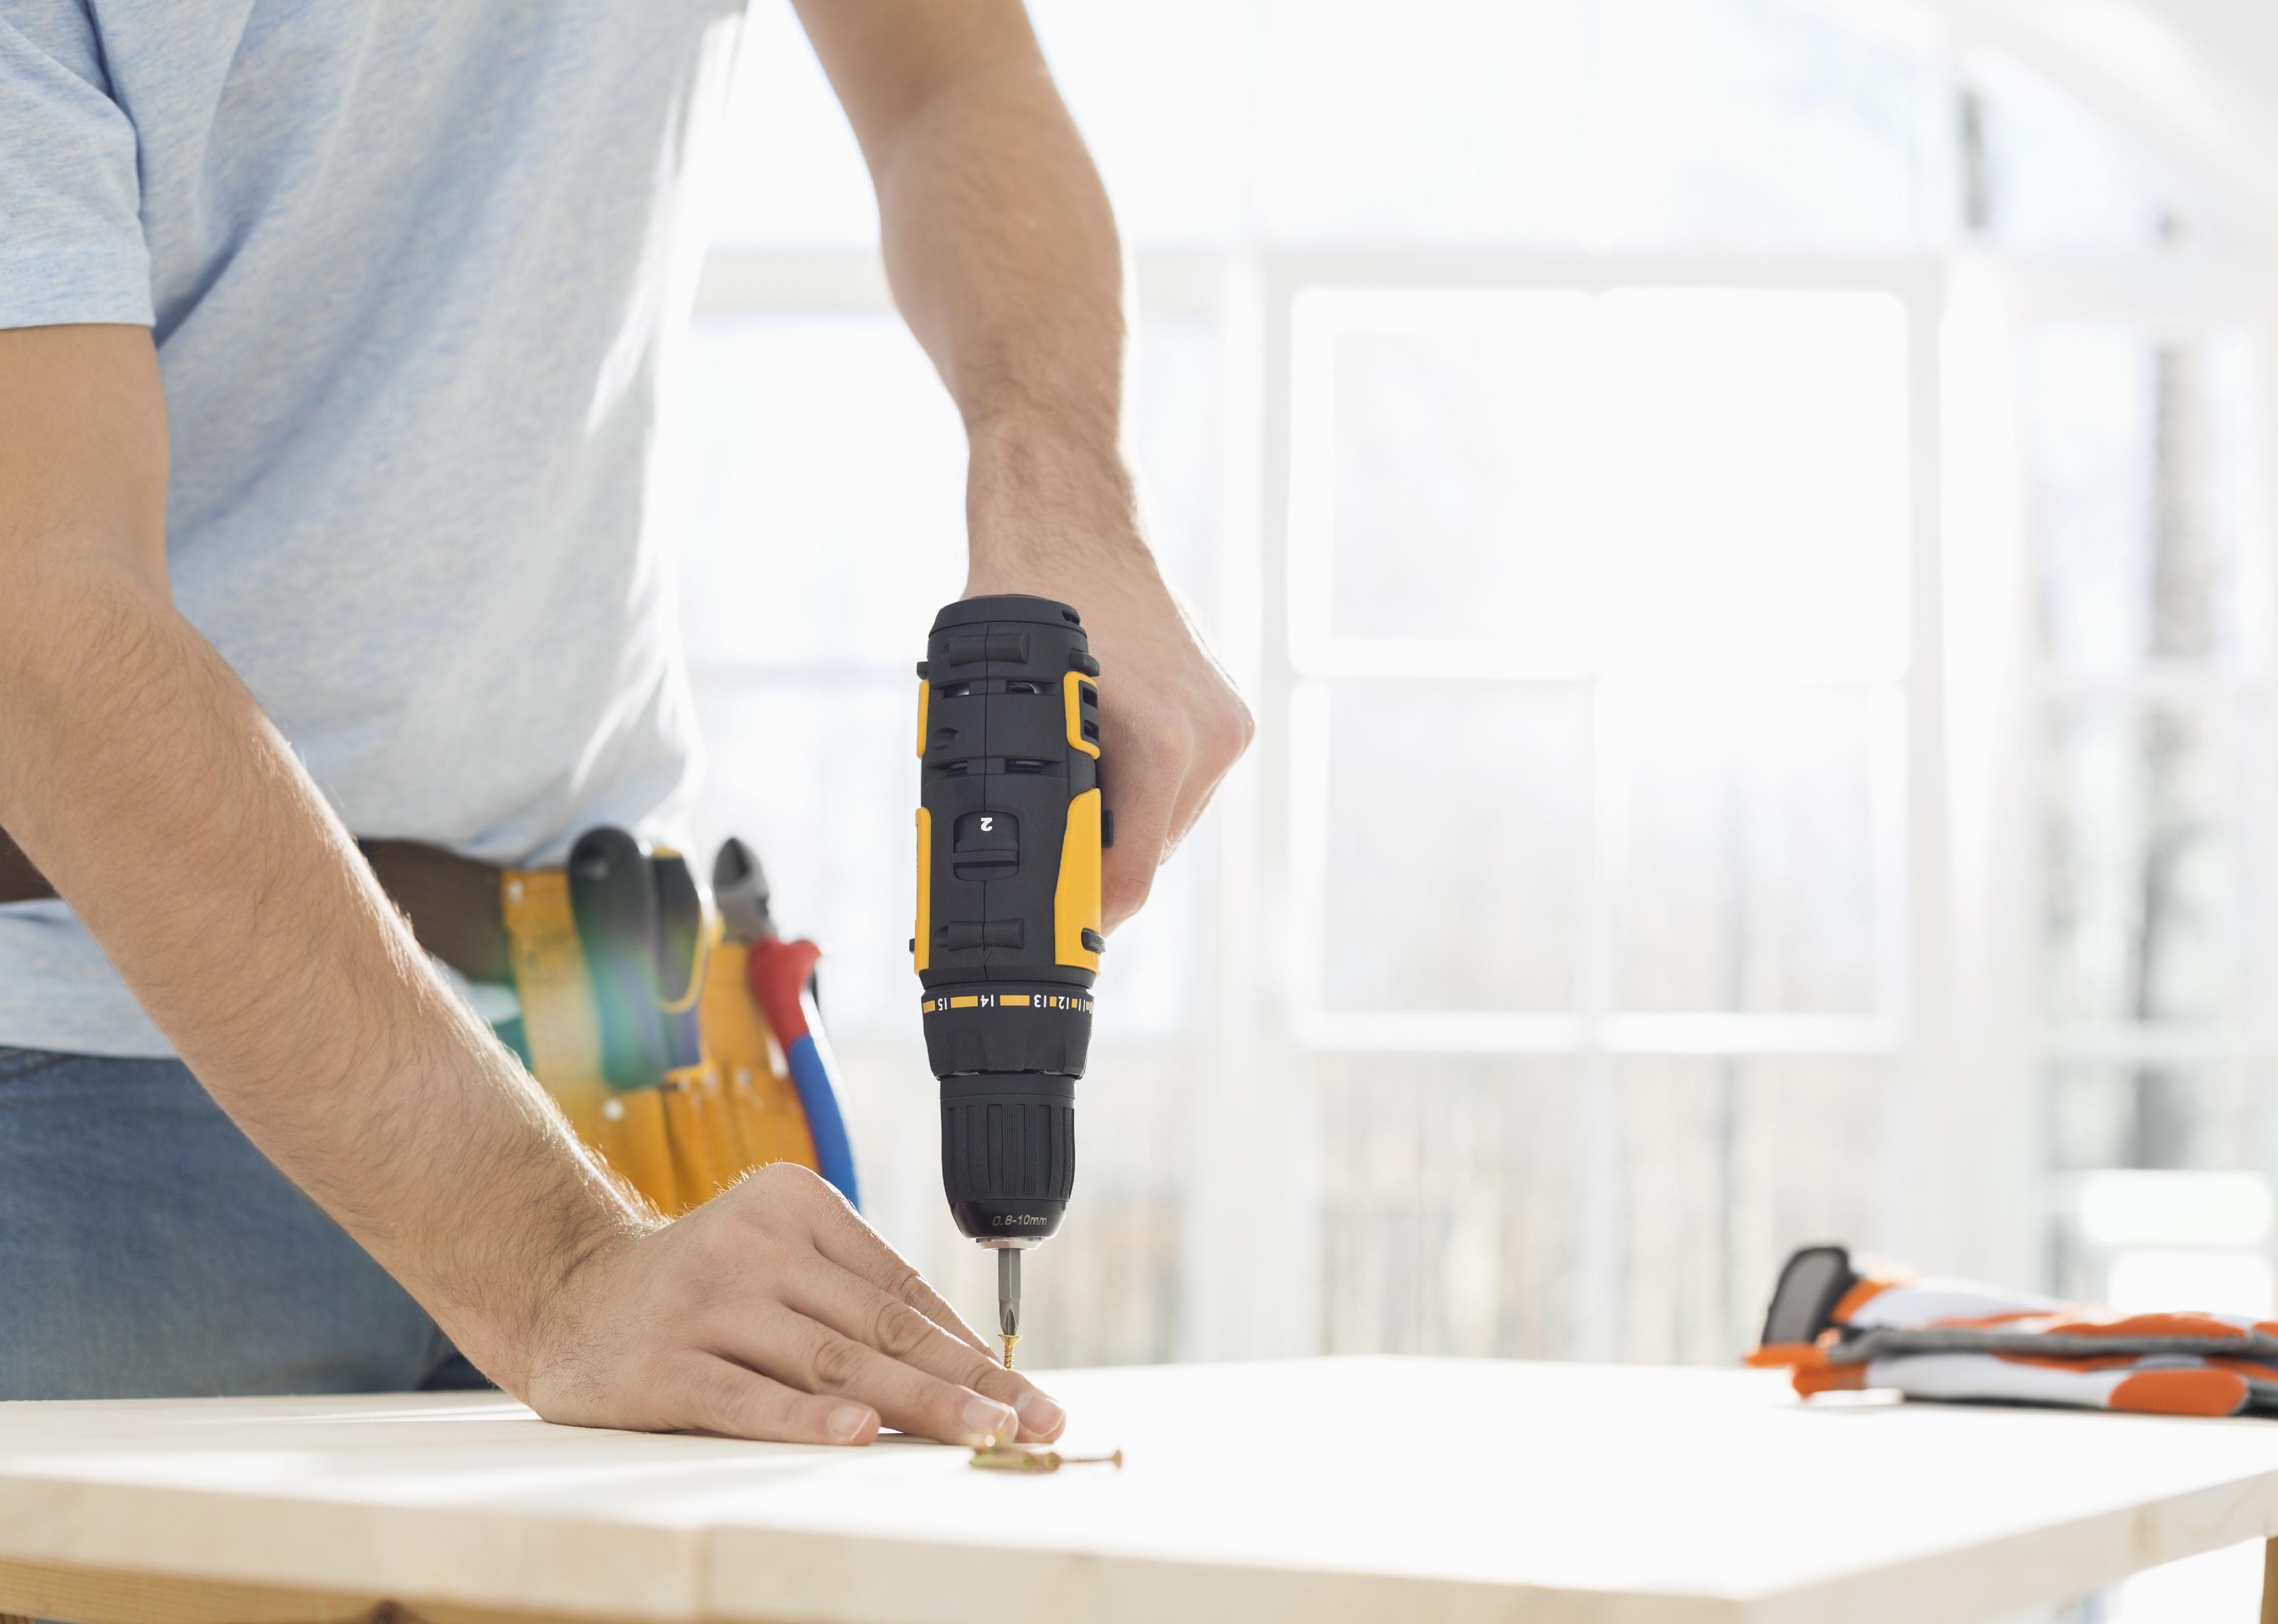 Midsection of man drilling nail on table